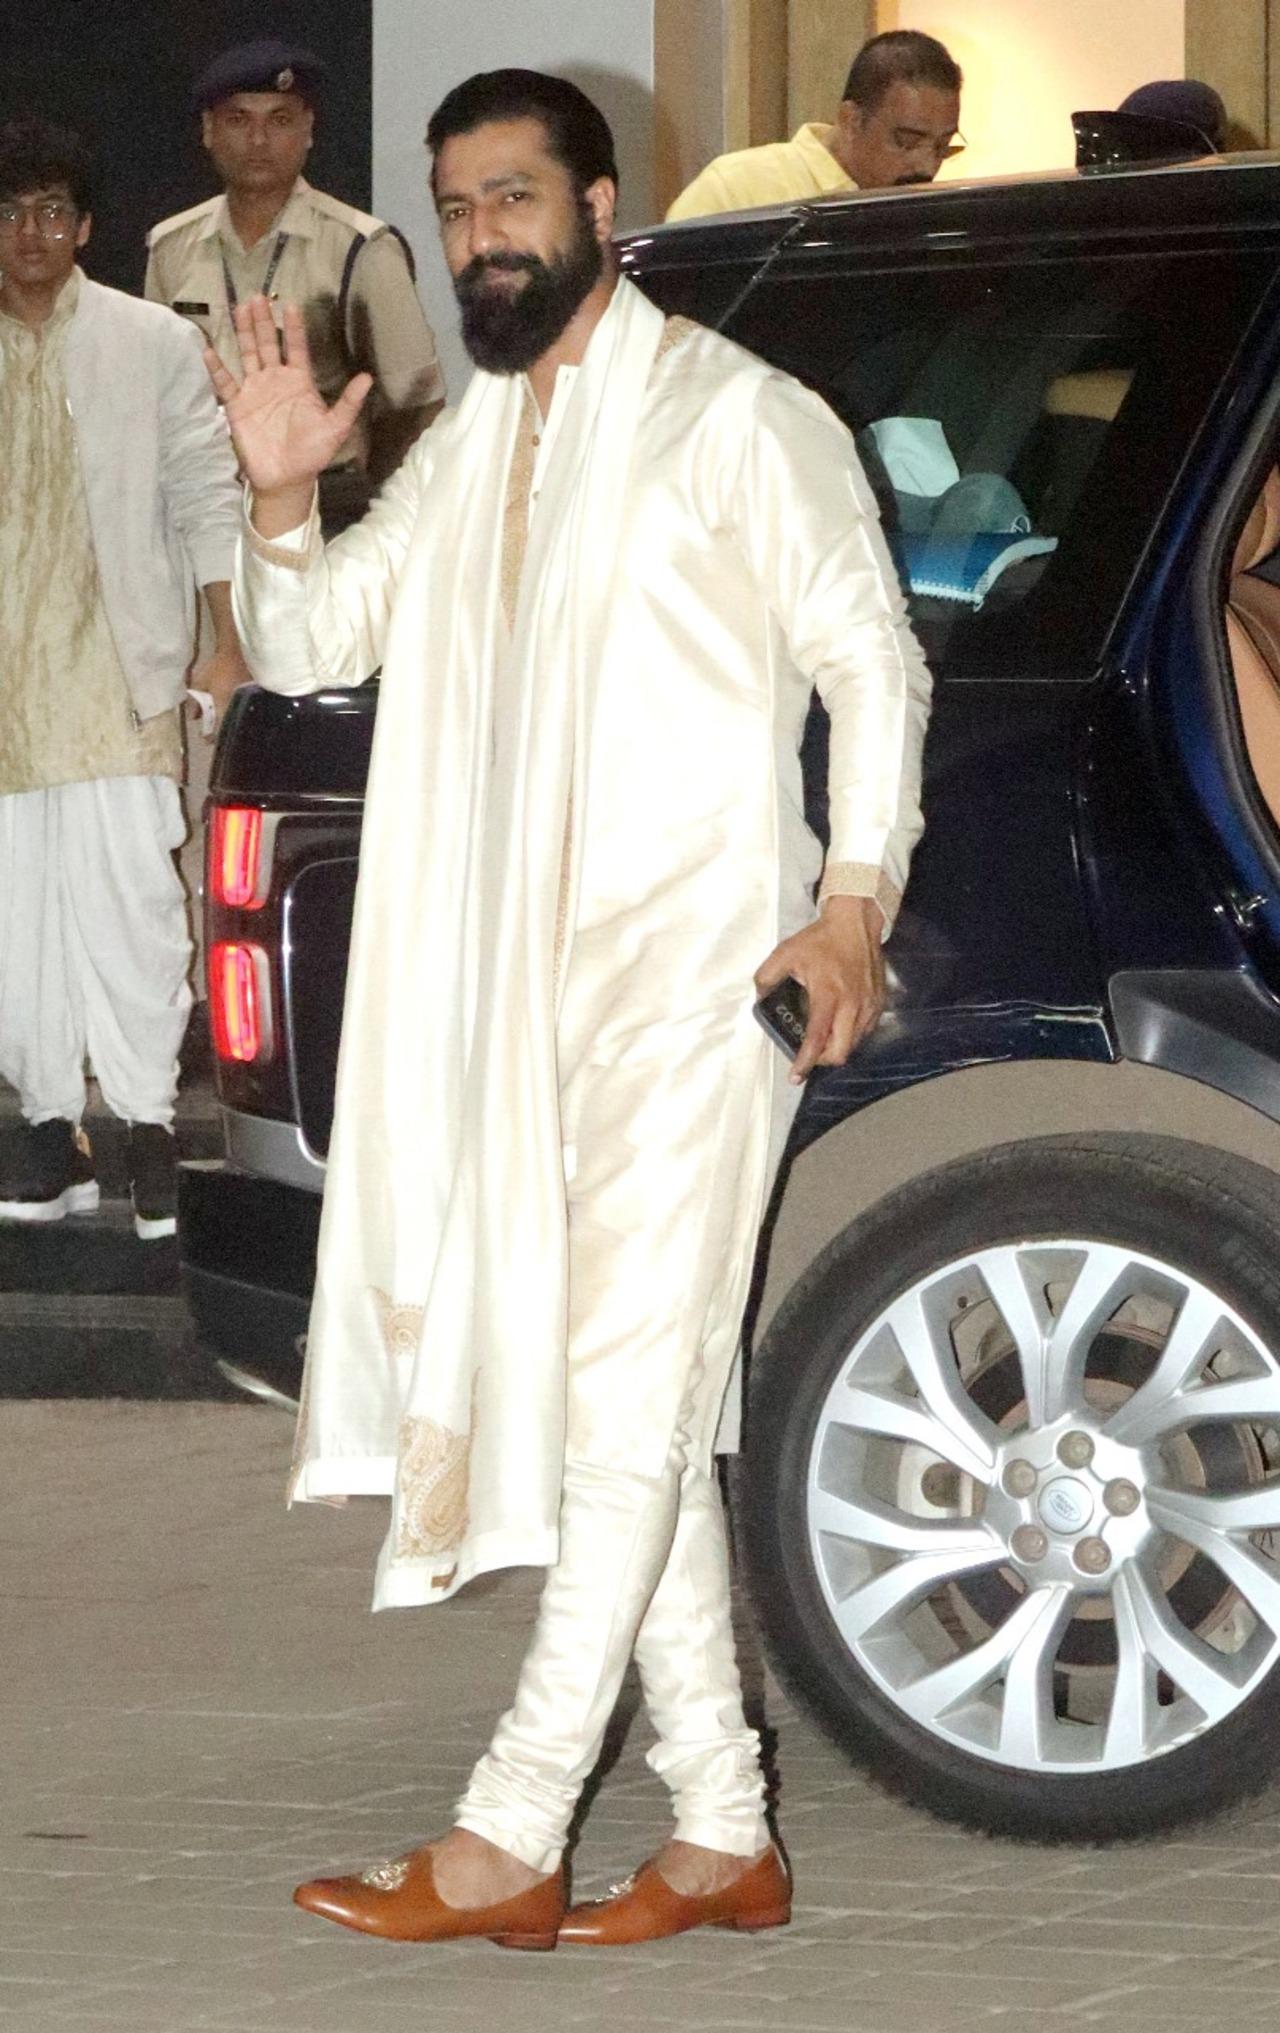 Vicky Kaushal gave a royal vibe in this well-fitted kurta pajama. His new bearded look is for his look as Chhatrapati Sambhaji Maharaj in the film Chaava